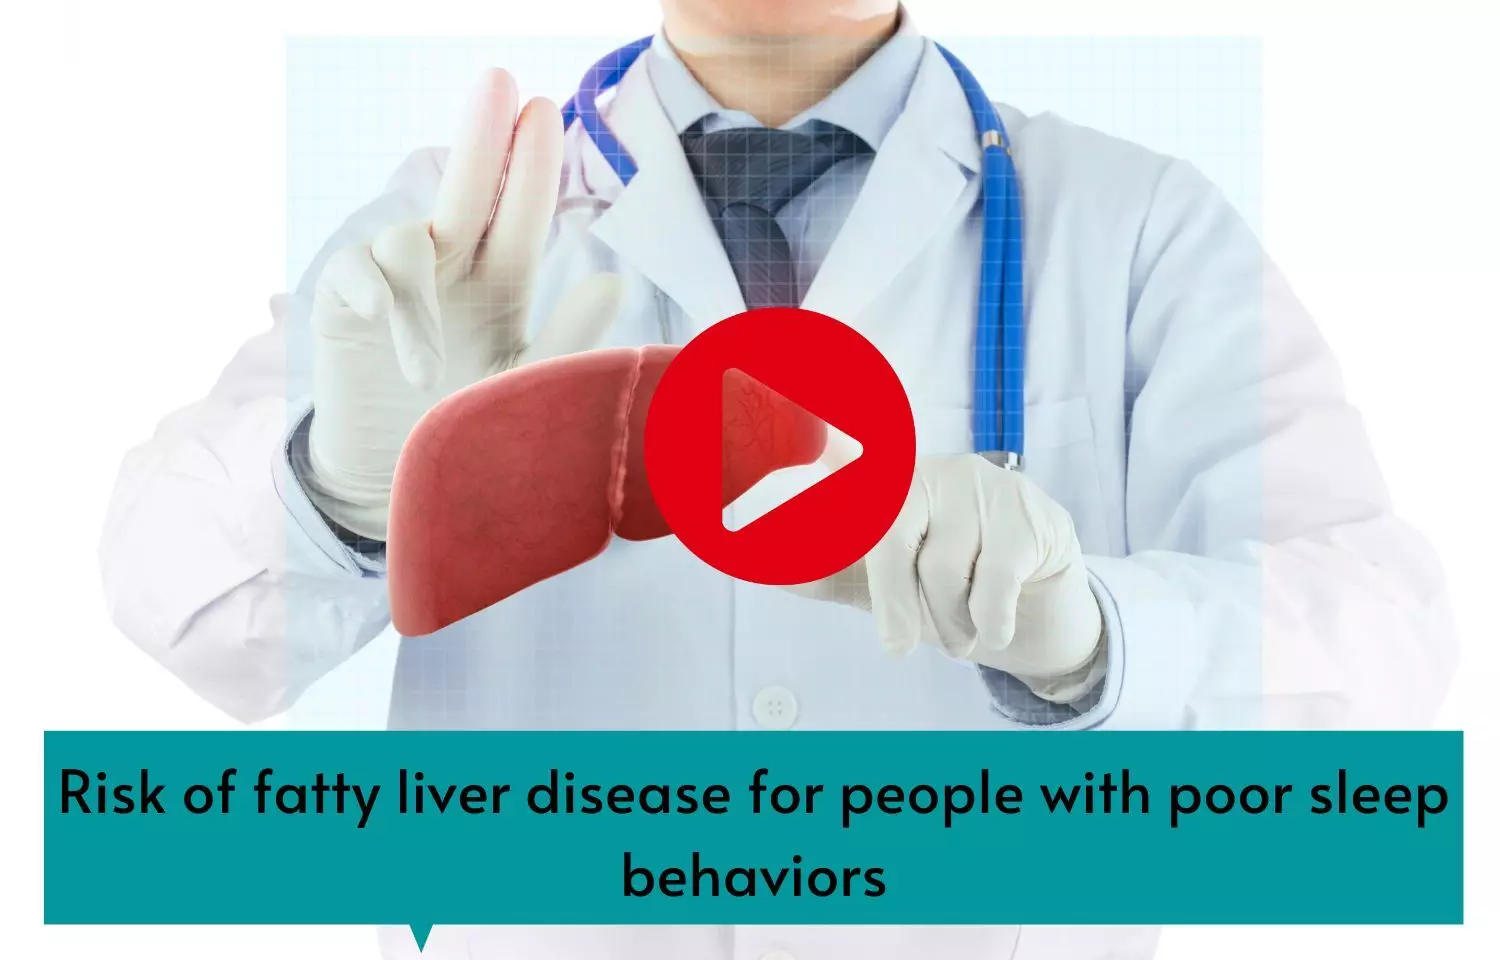 Risk of fatty liver disease for people with poor sleep behaviors